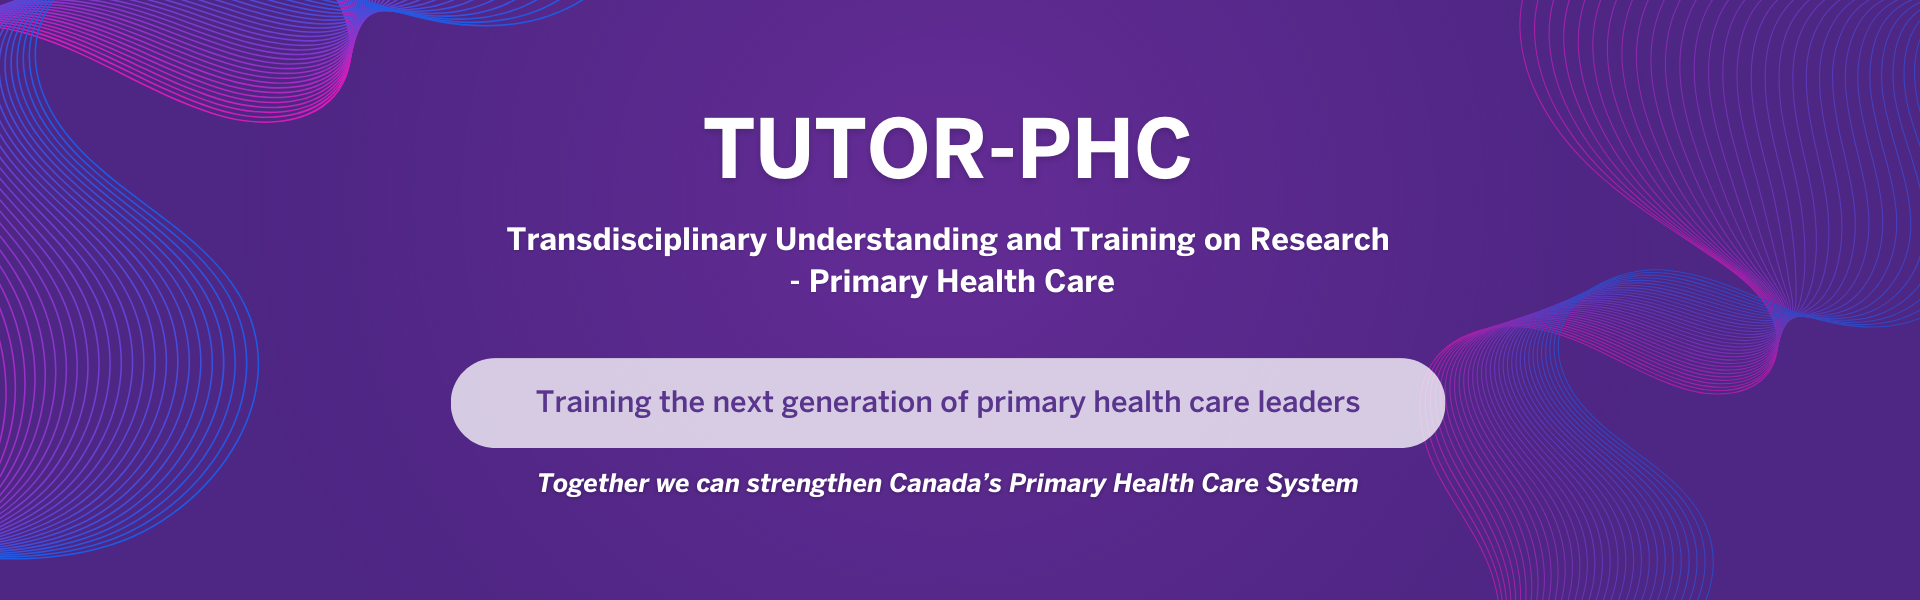 TUTOR-PHC, Transdisciplinary Understanding and Training on Research  - Primary Health Care